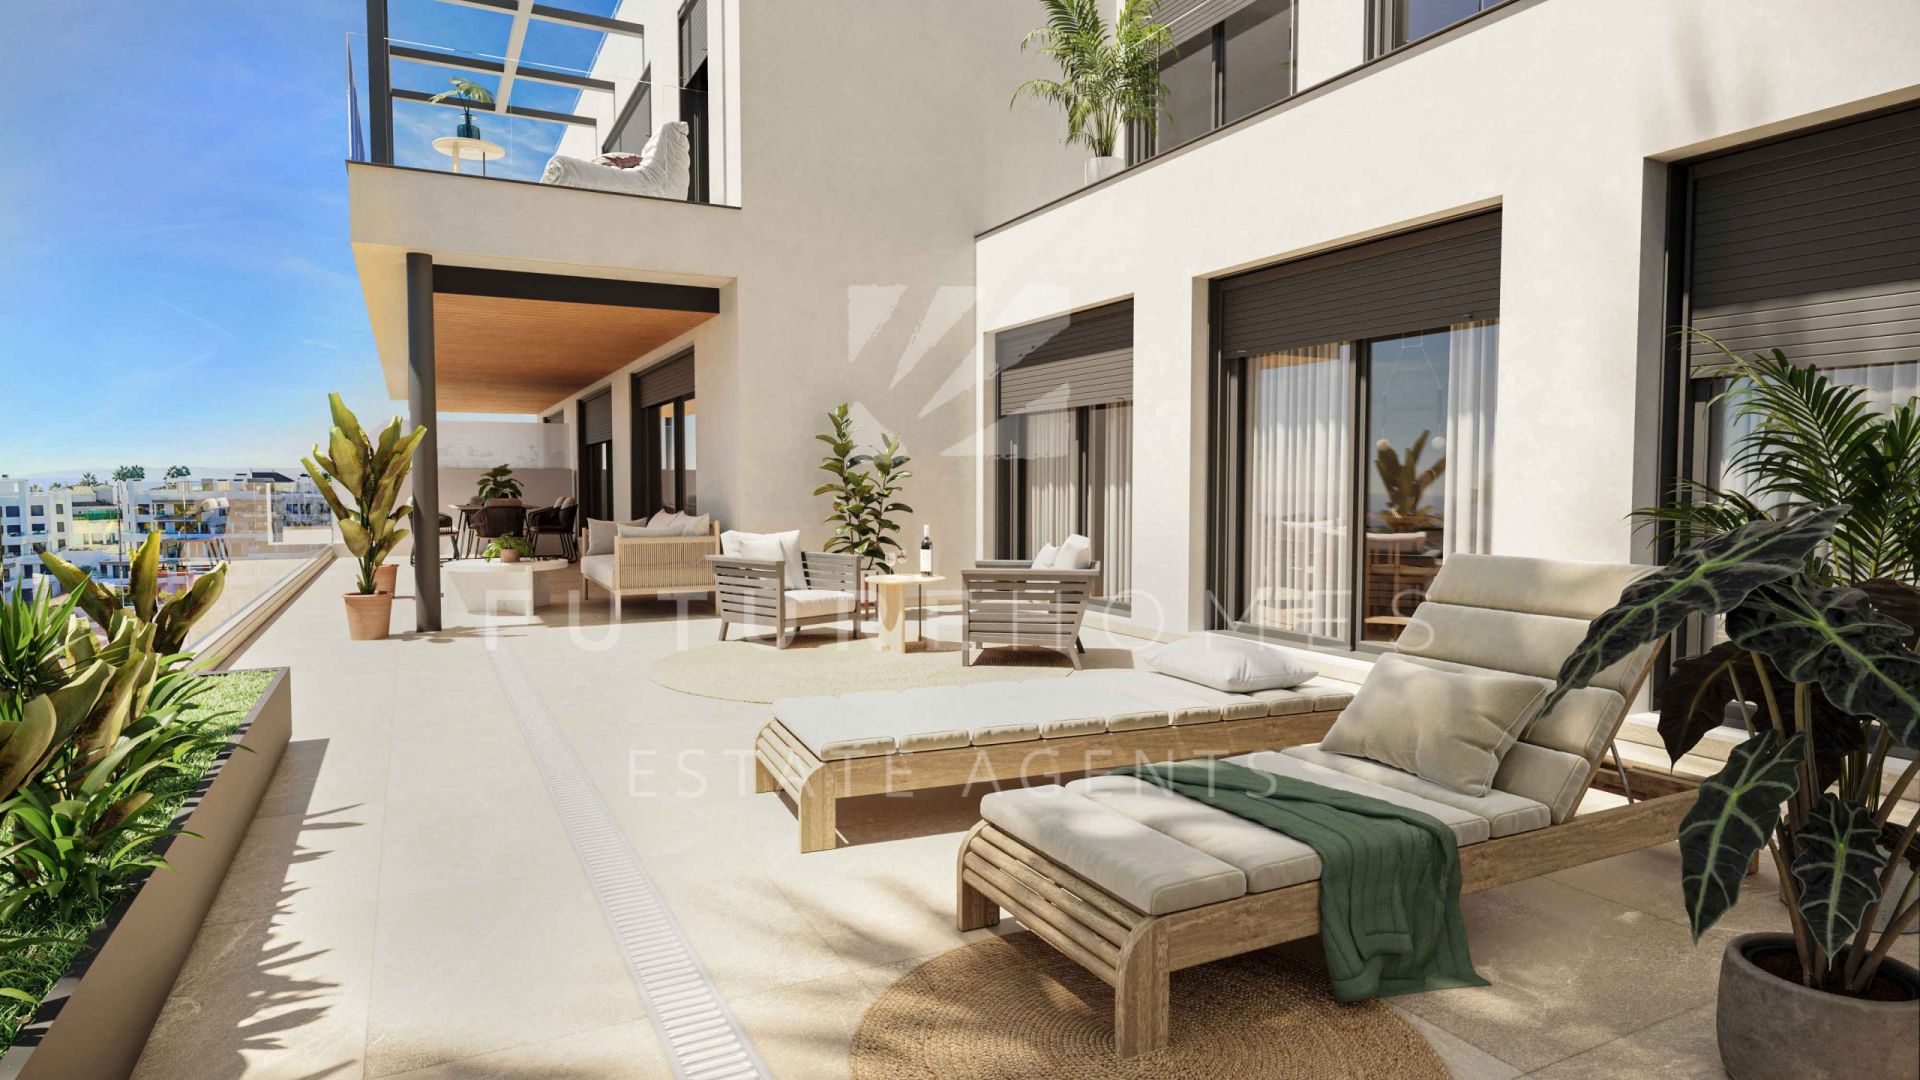 New release - off plan contemporary style apartments in Las Mesas Estepona! - within walking distance of beaches, town centre and port.